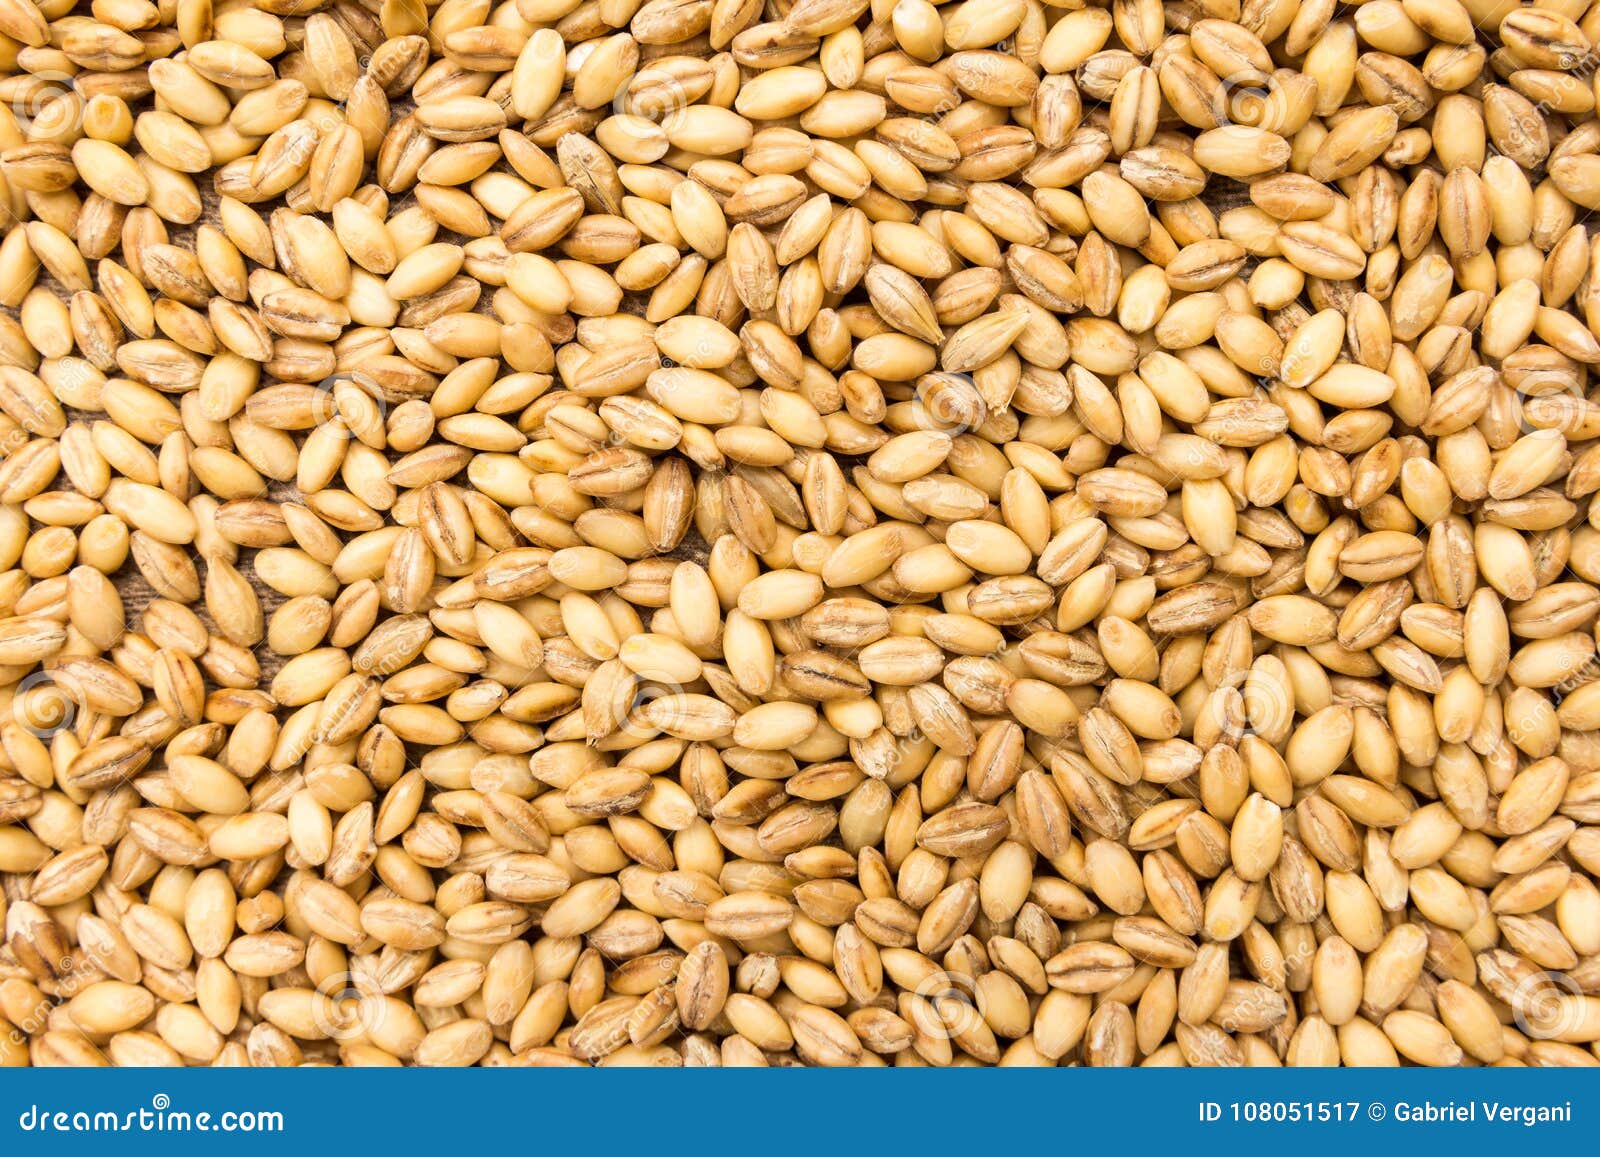 barley cereal grain. closeup of grains, background use.